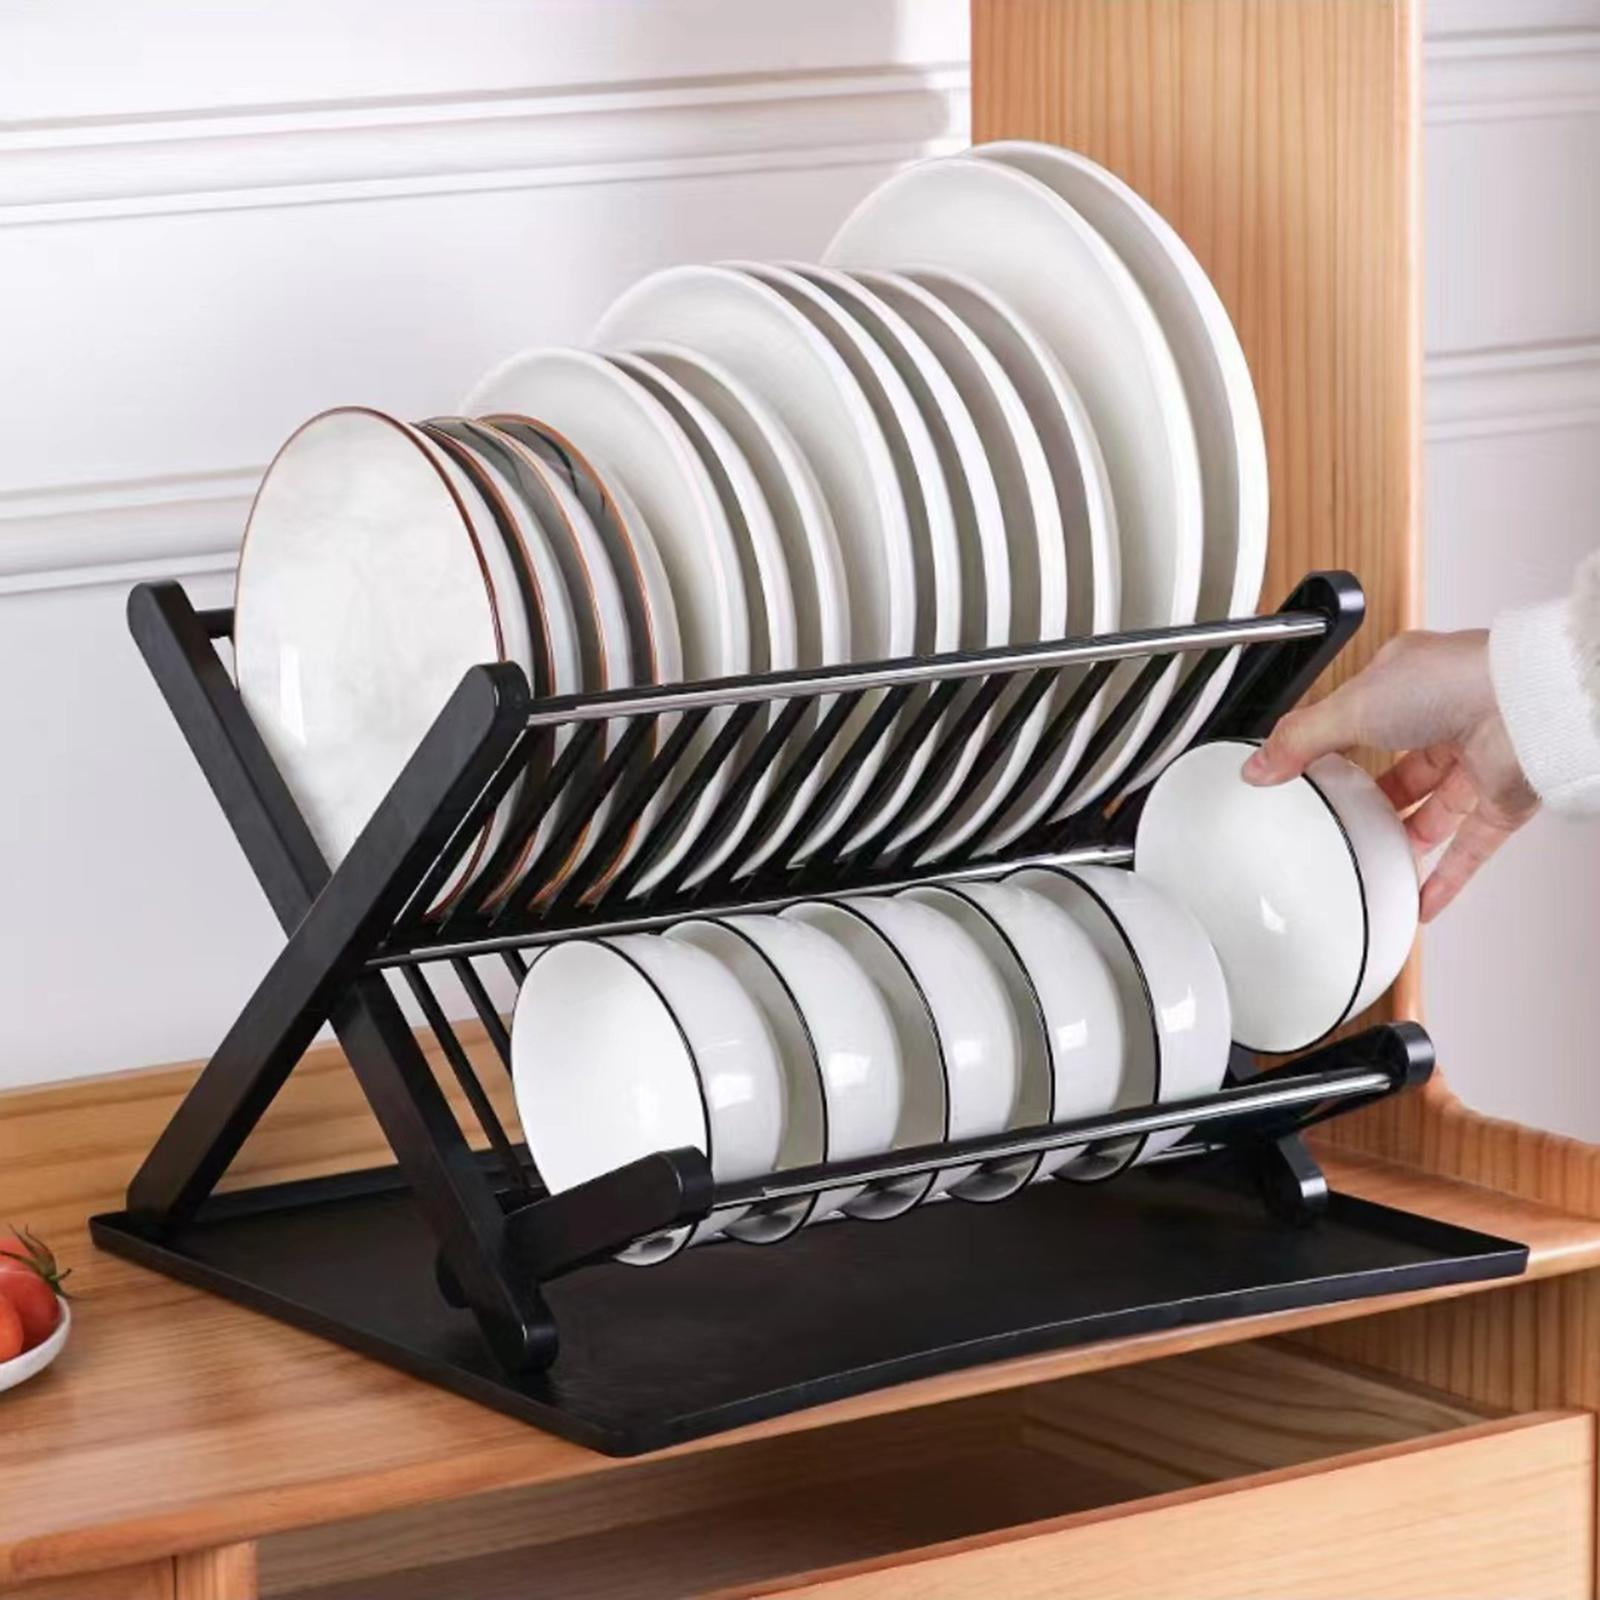 Folding Dish Rack - Dish Drainer Folds Away When Not in Use